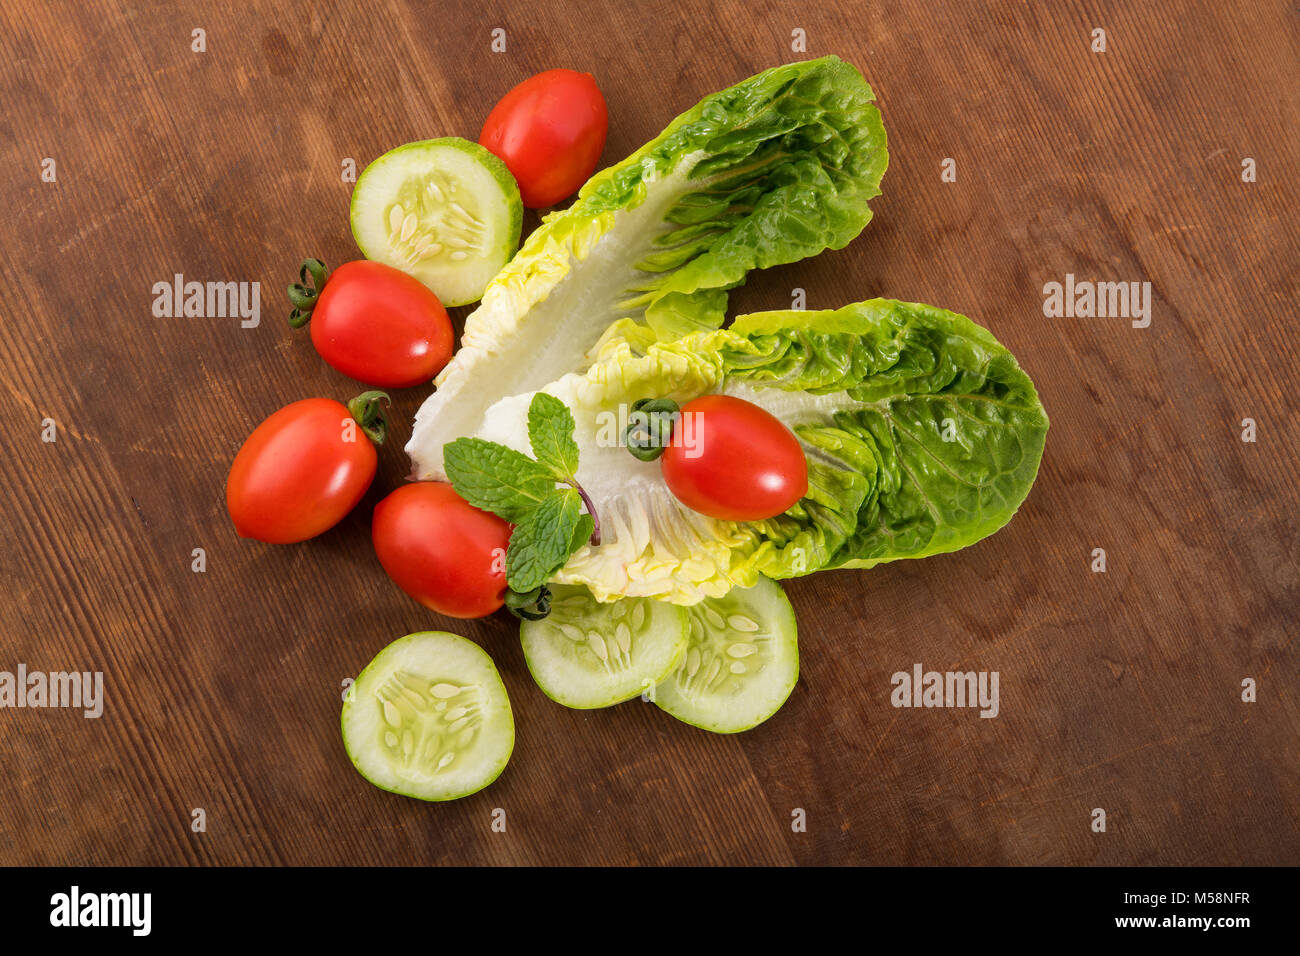 Vegetable: Fresh Green Romaine Lettuce with Baby Tomatoes, Mint Leaves and Cucumber Slices on Brown Wooden Background Stock Photo